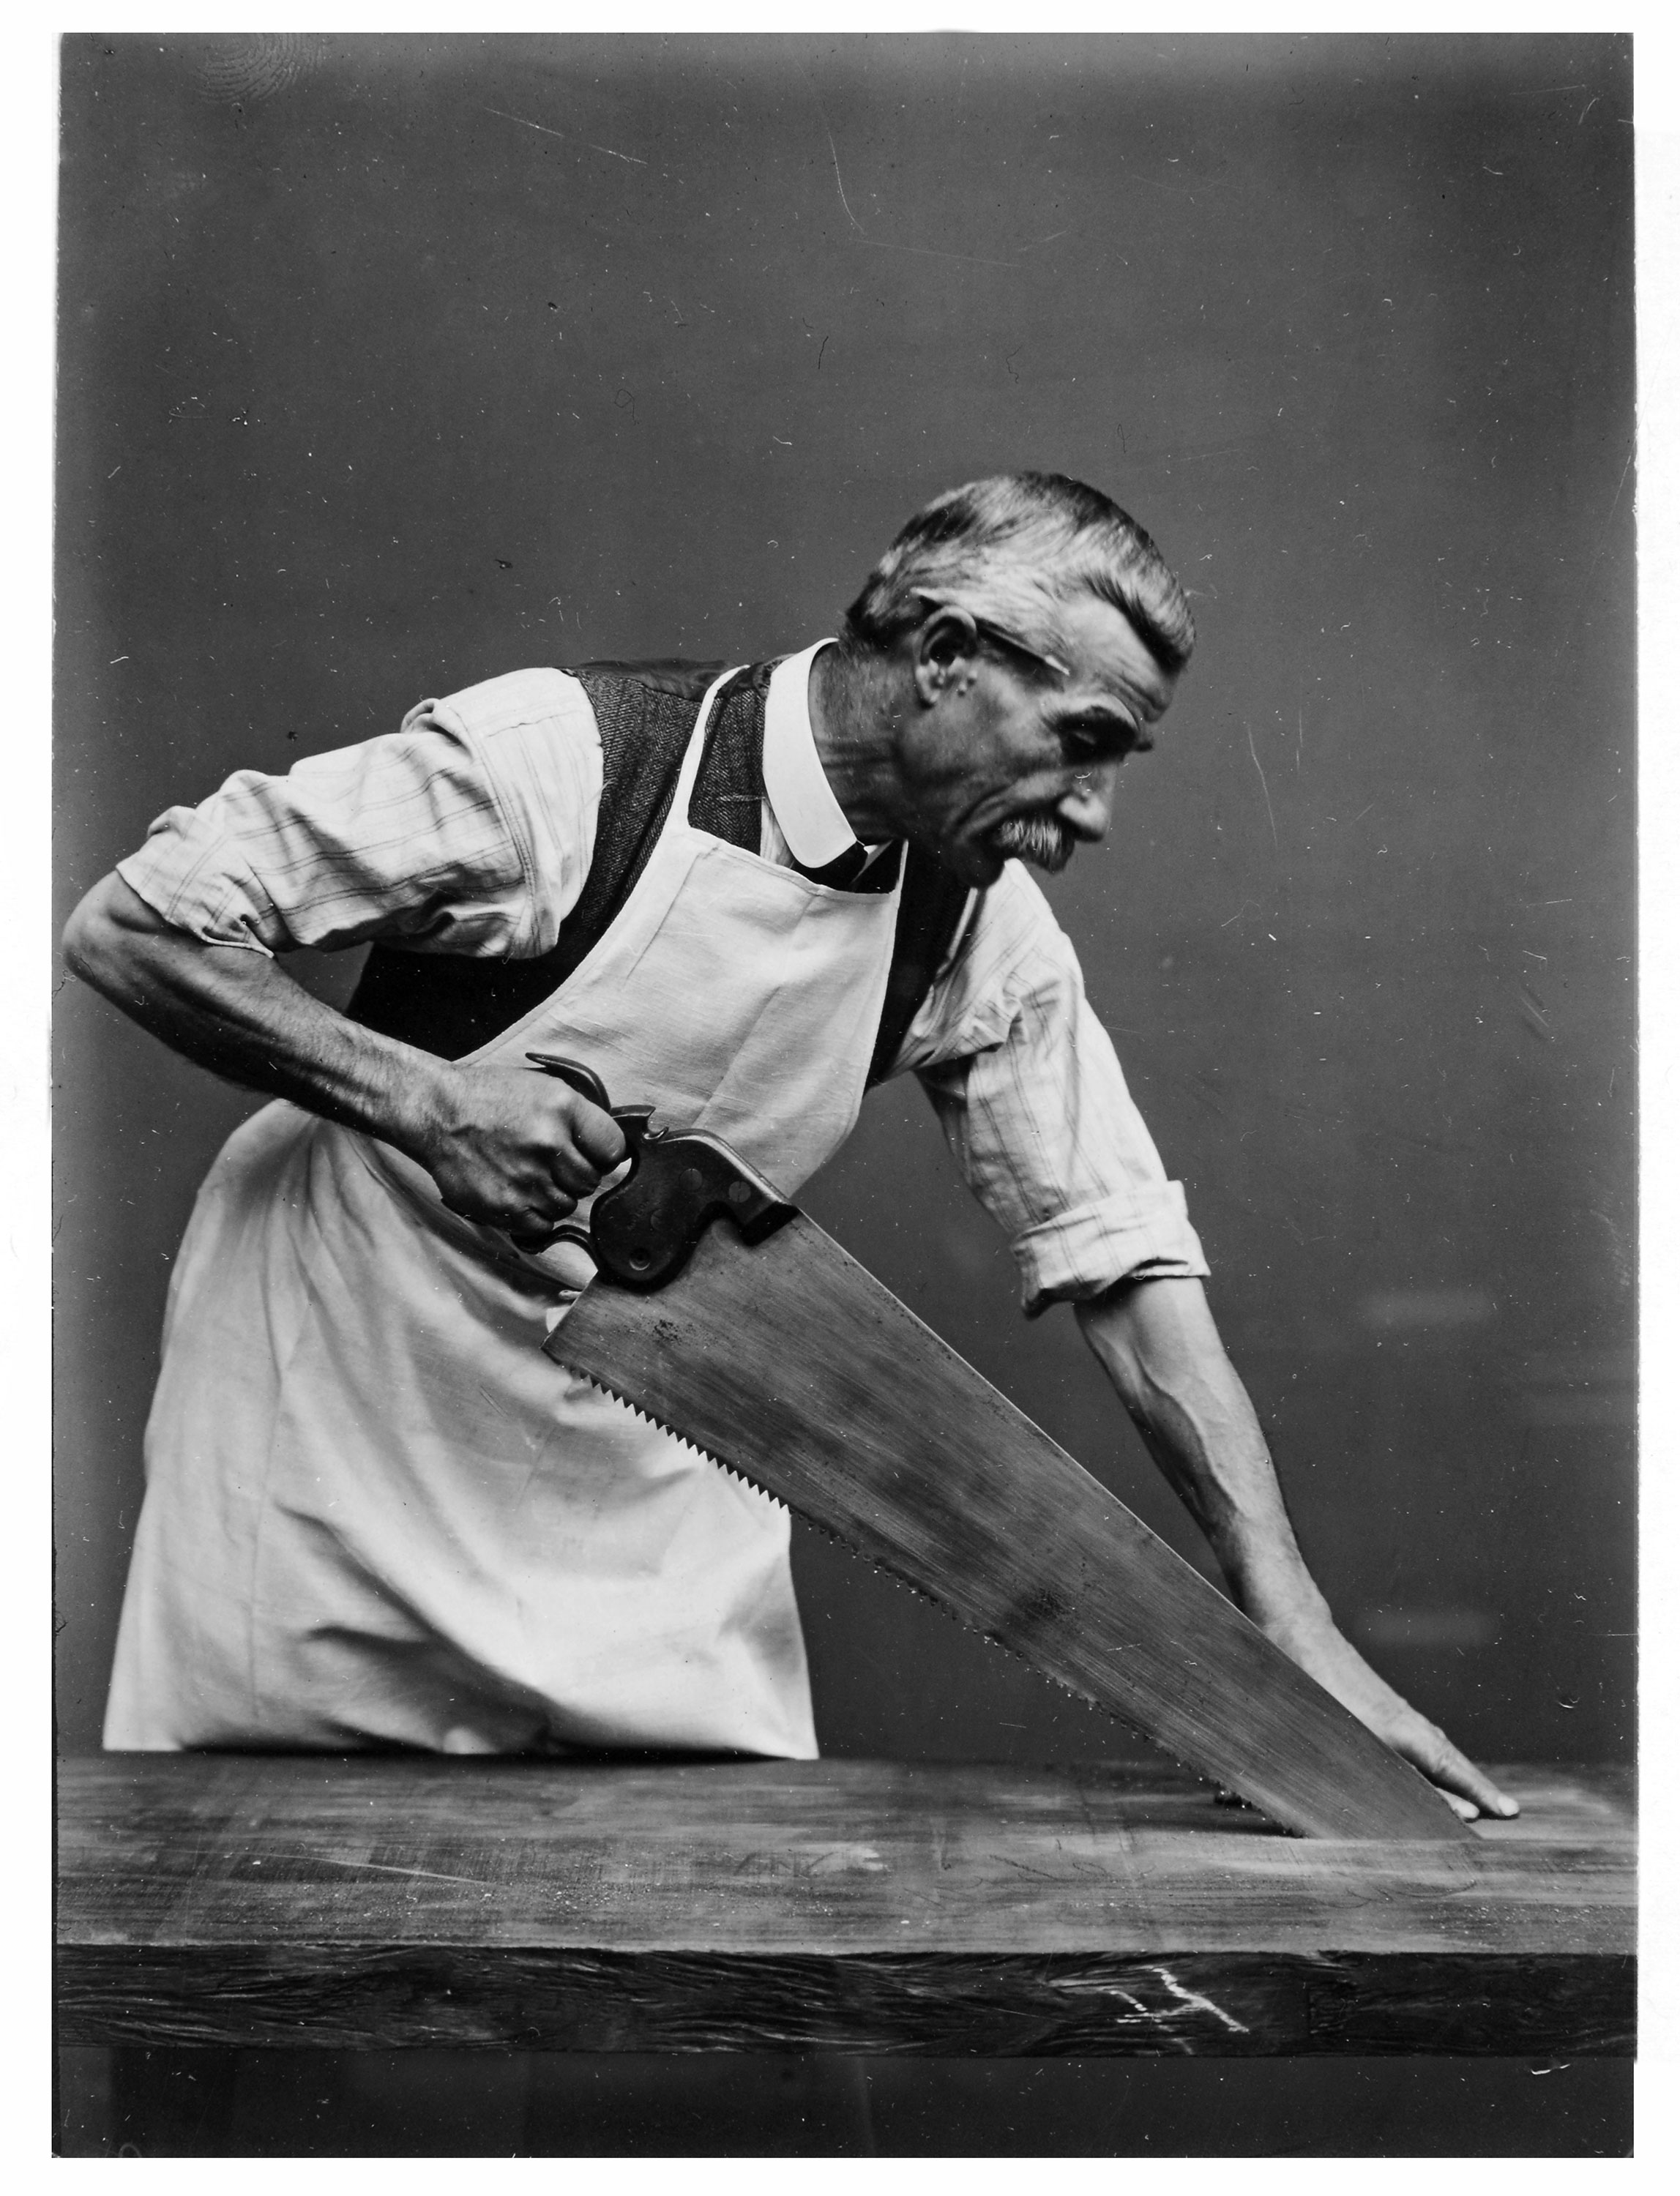 A photograph of a man using a handsaw to cut a piece of wood